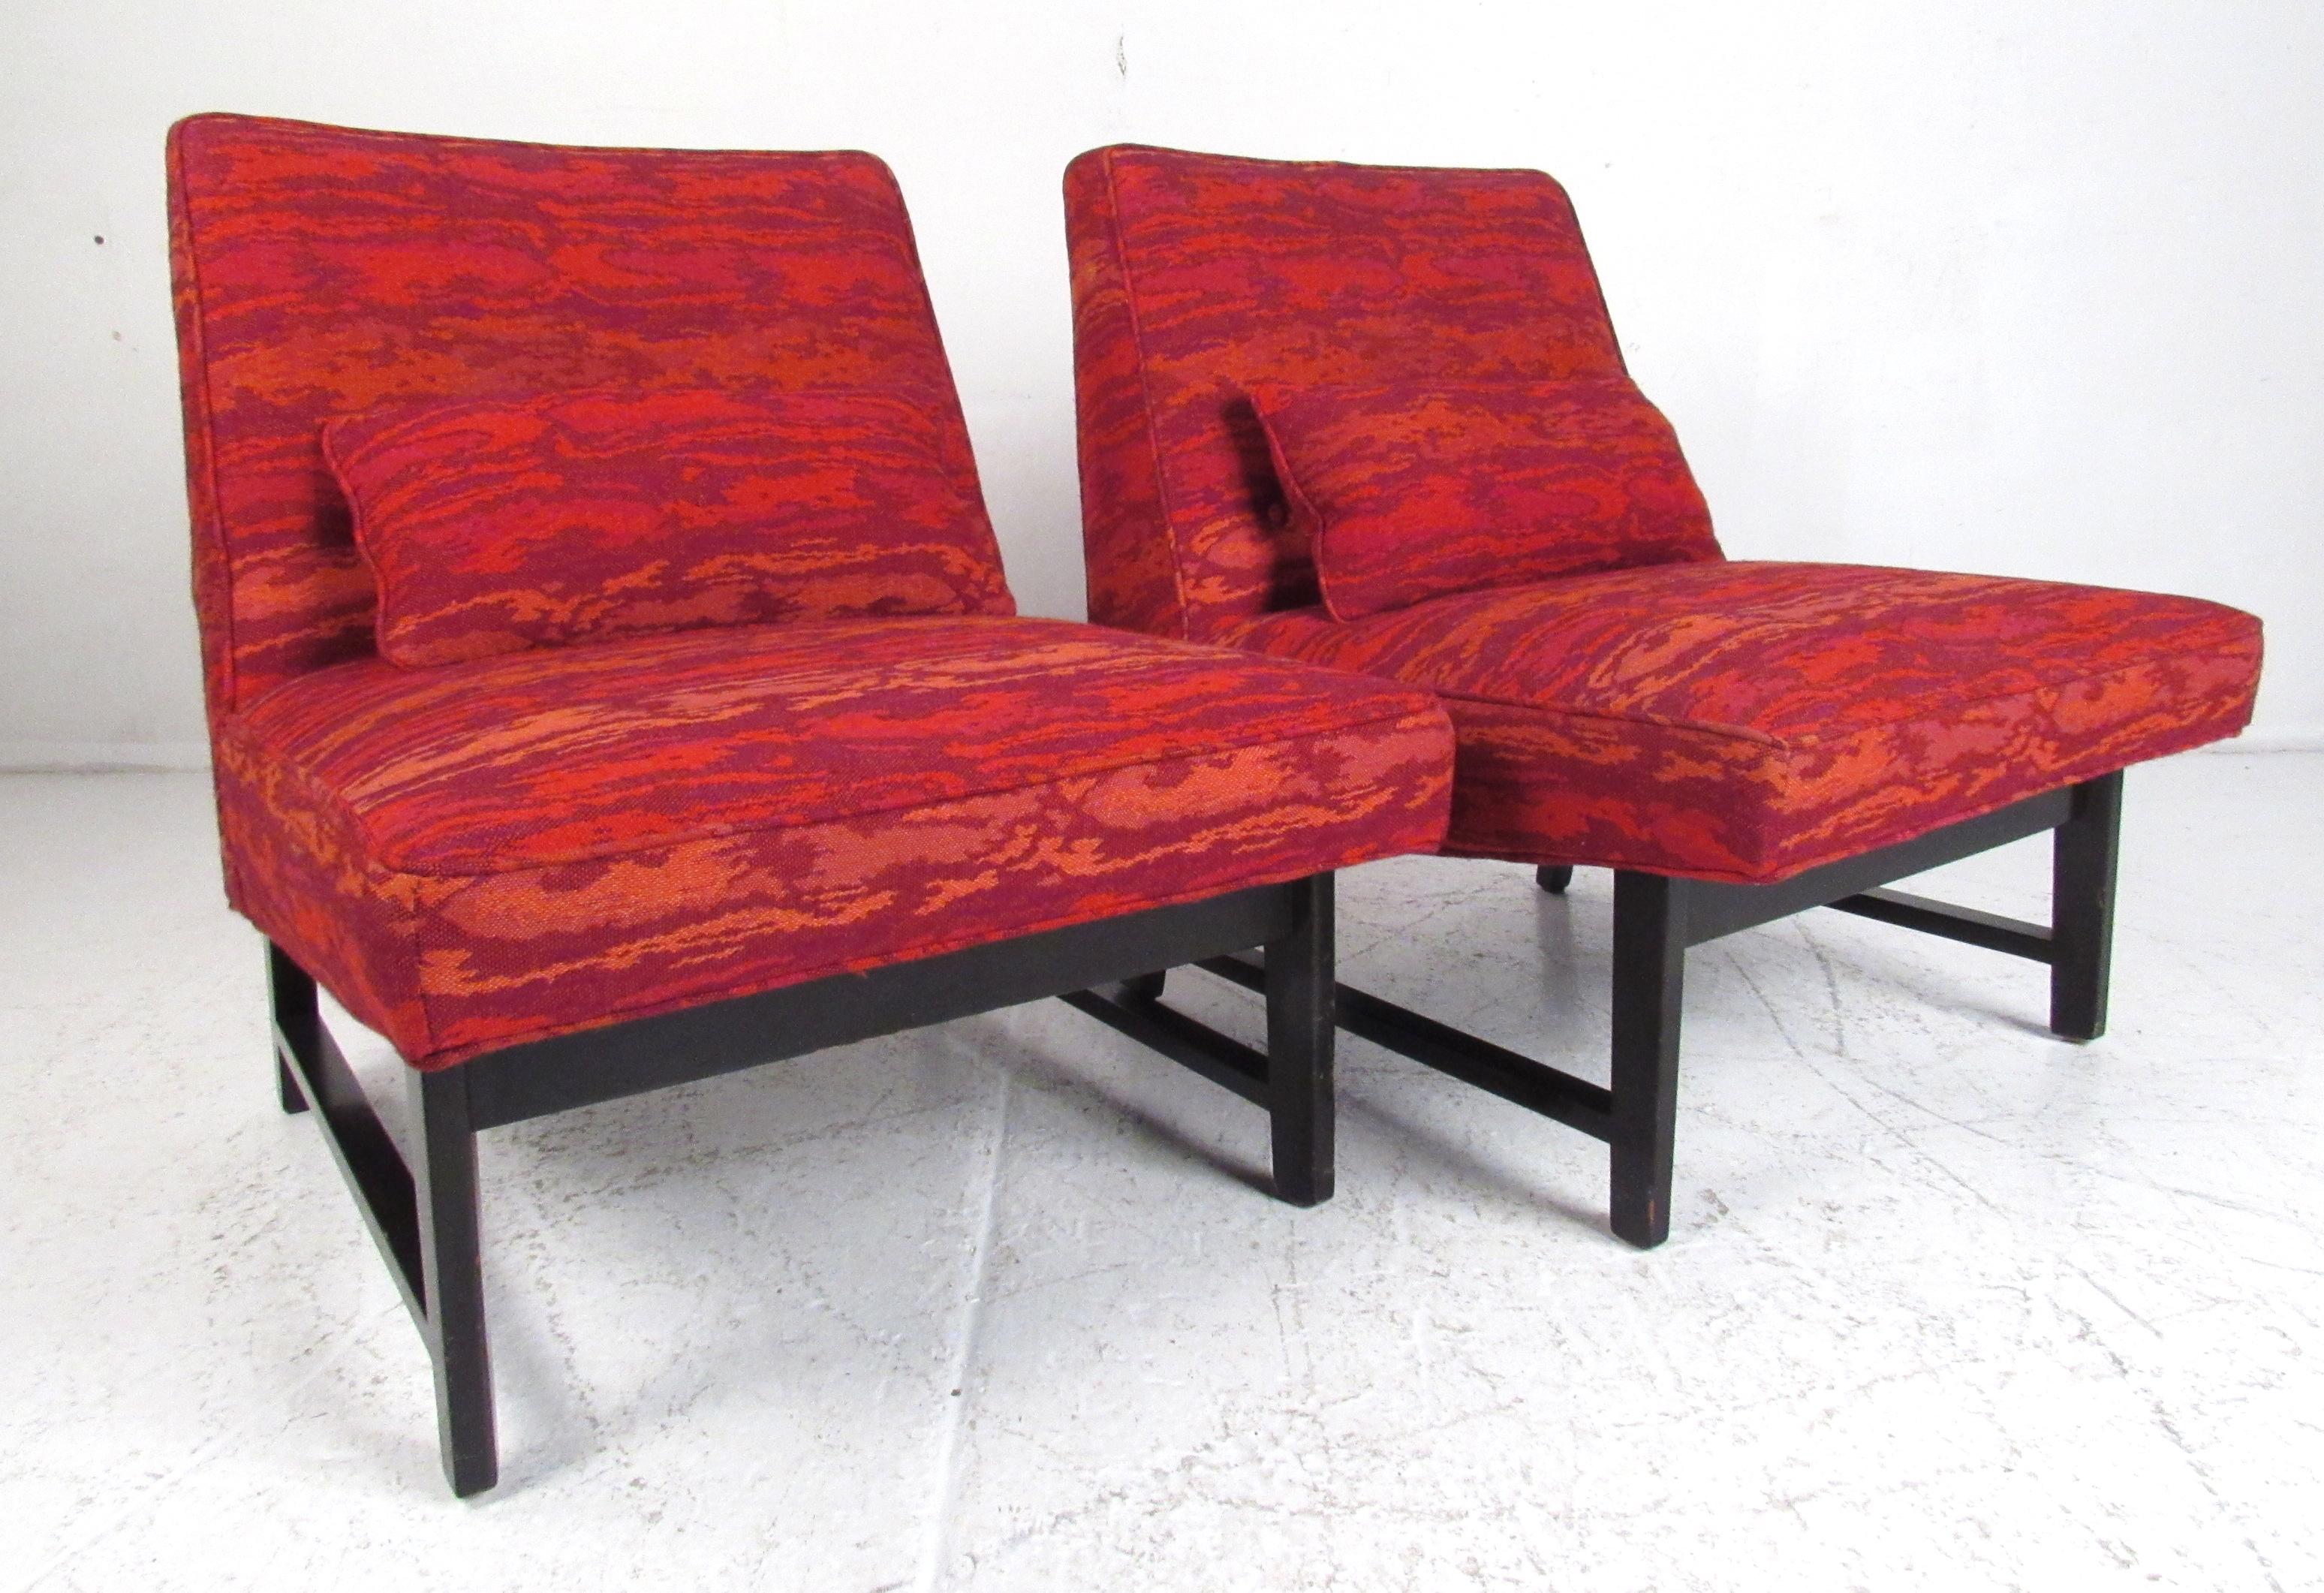 American Mid-Century Modern Slipper Chairs by Edward Wormley for Dunbar For Sale